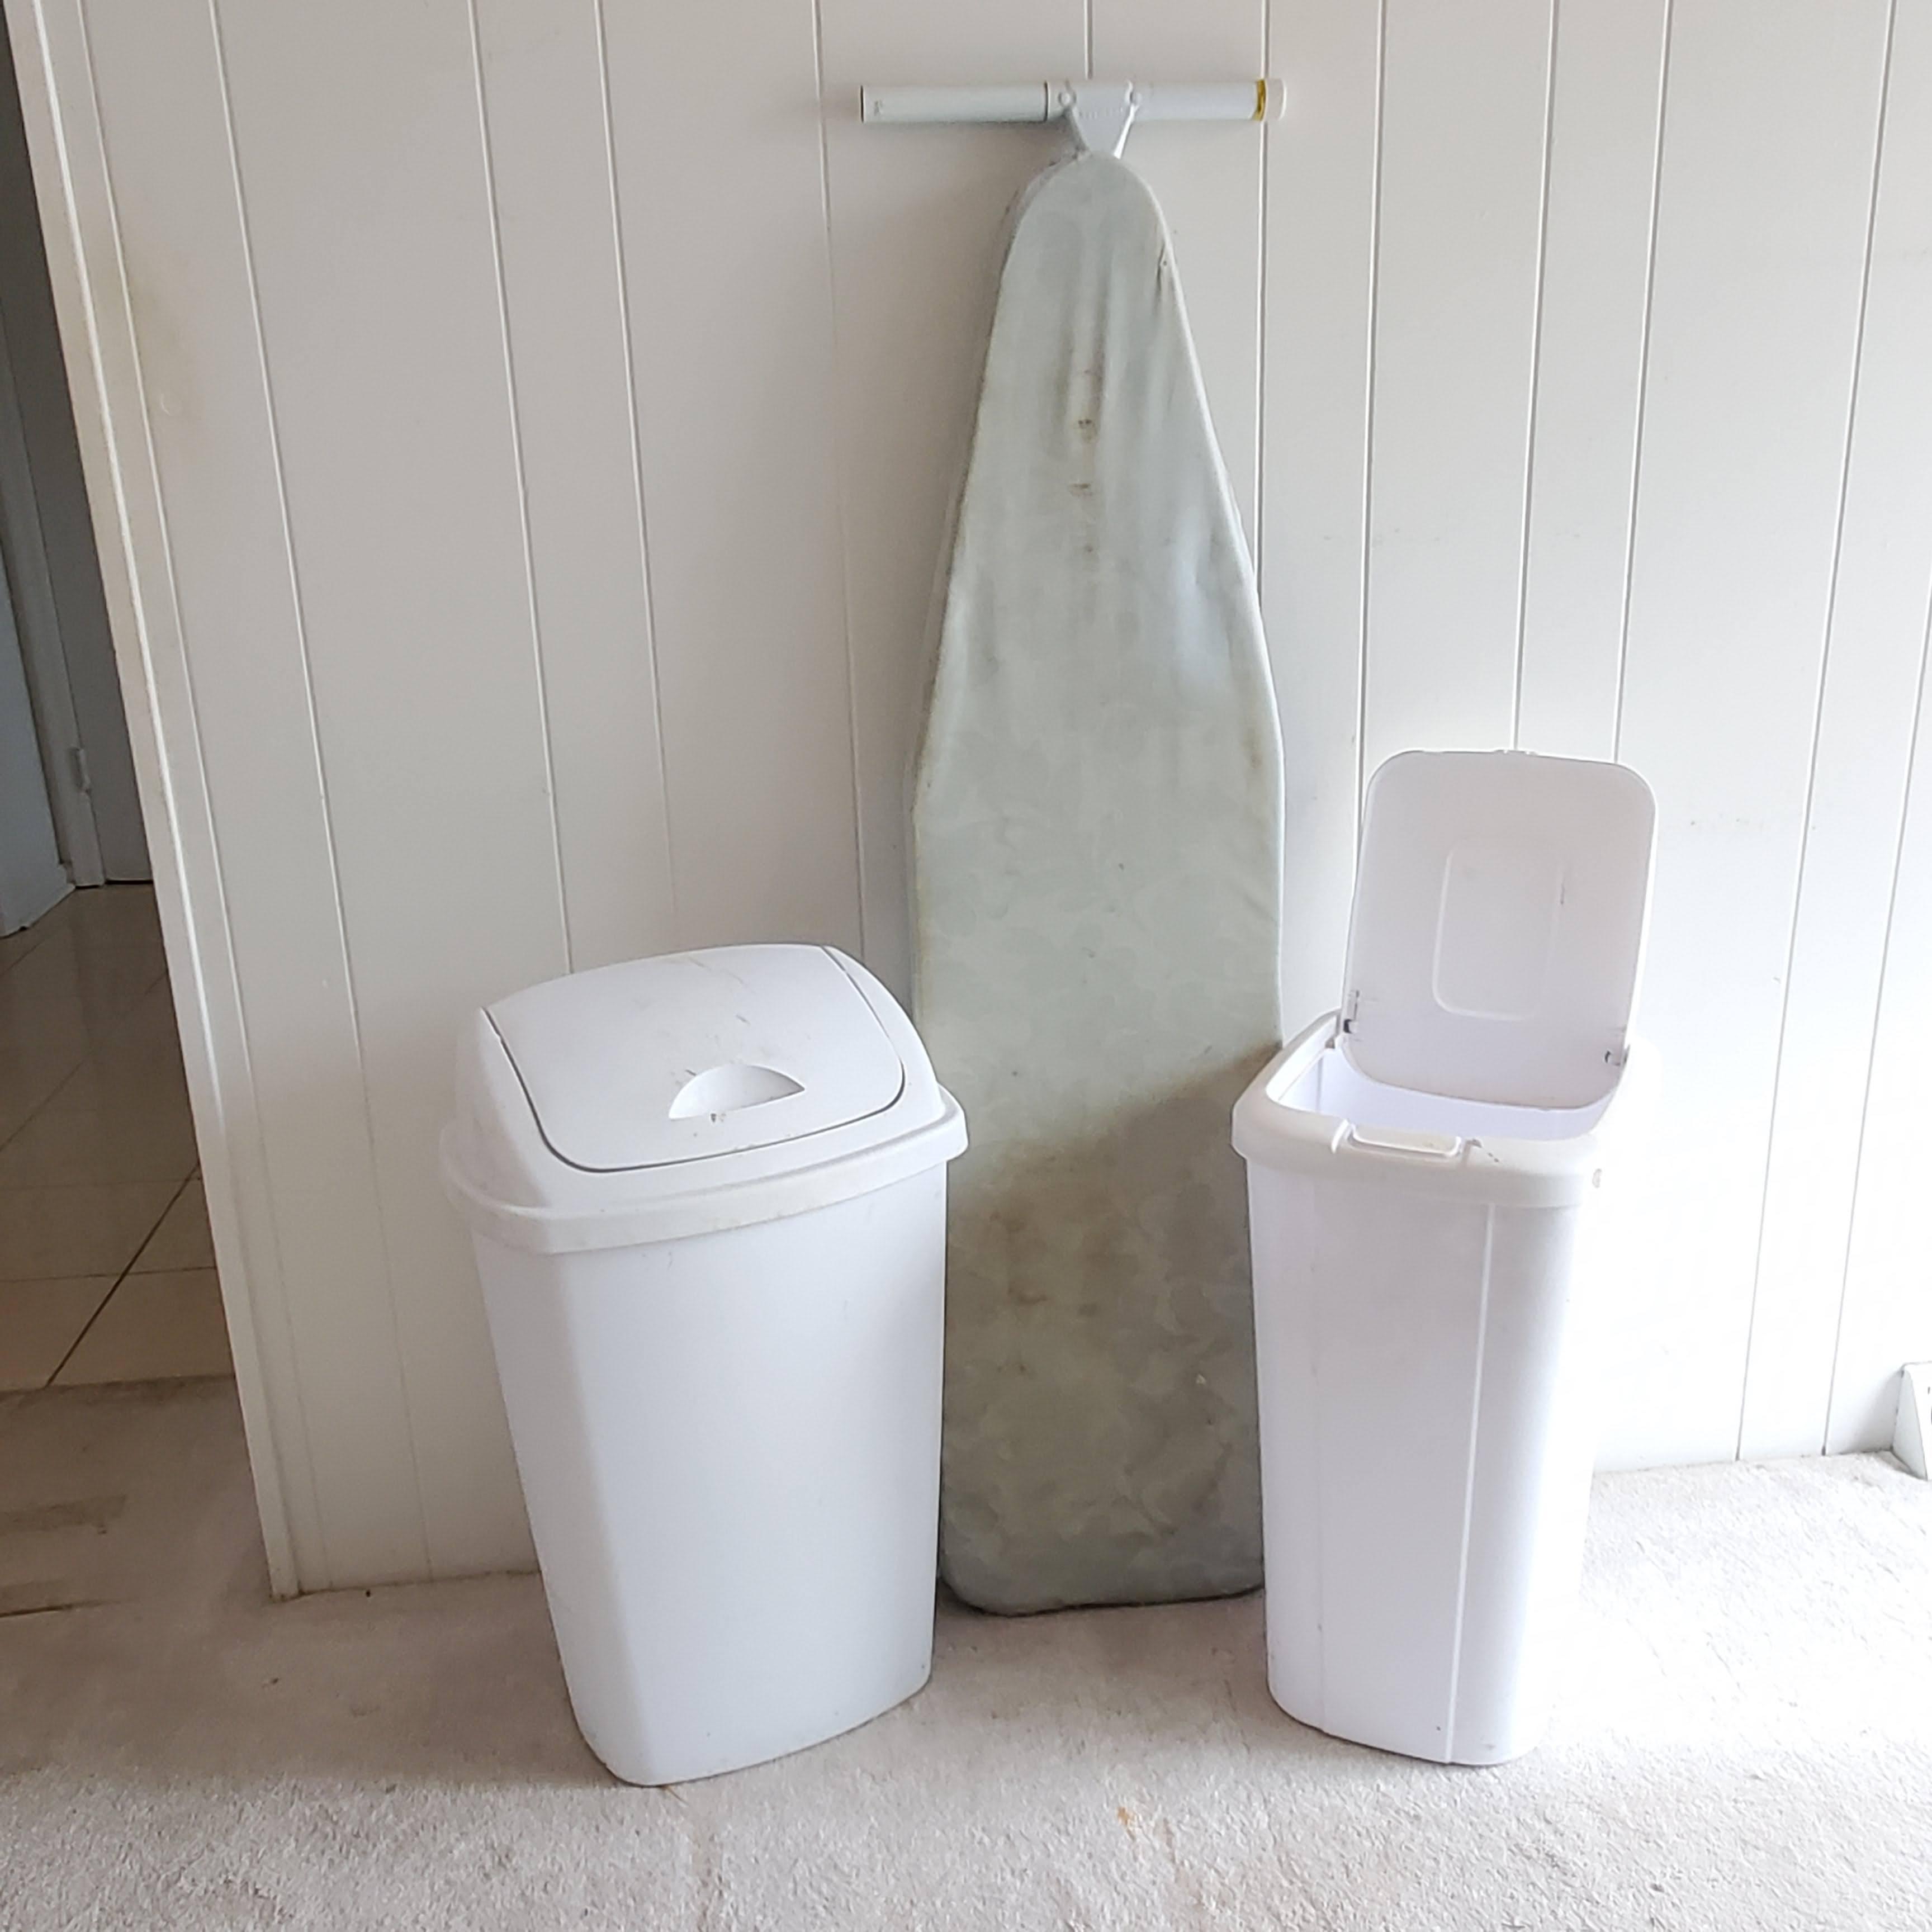 2 13-Gallon Size Trash Cans and Ironing Board